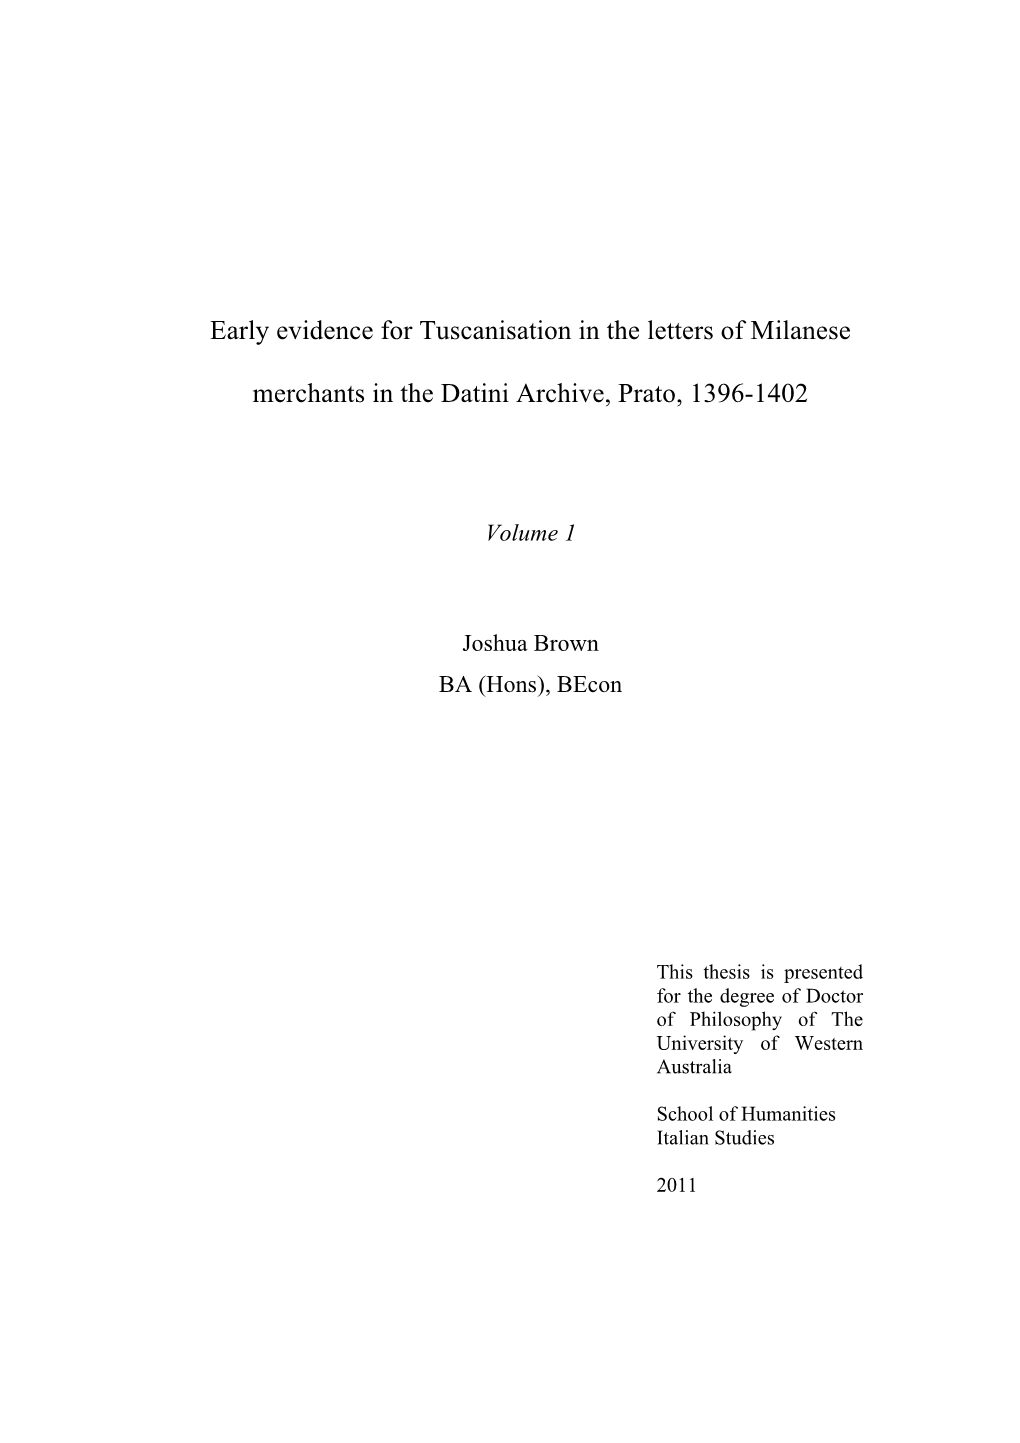 Early Evidence for Tuscanisation in the Letters of Milanese Merchants In